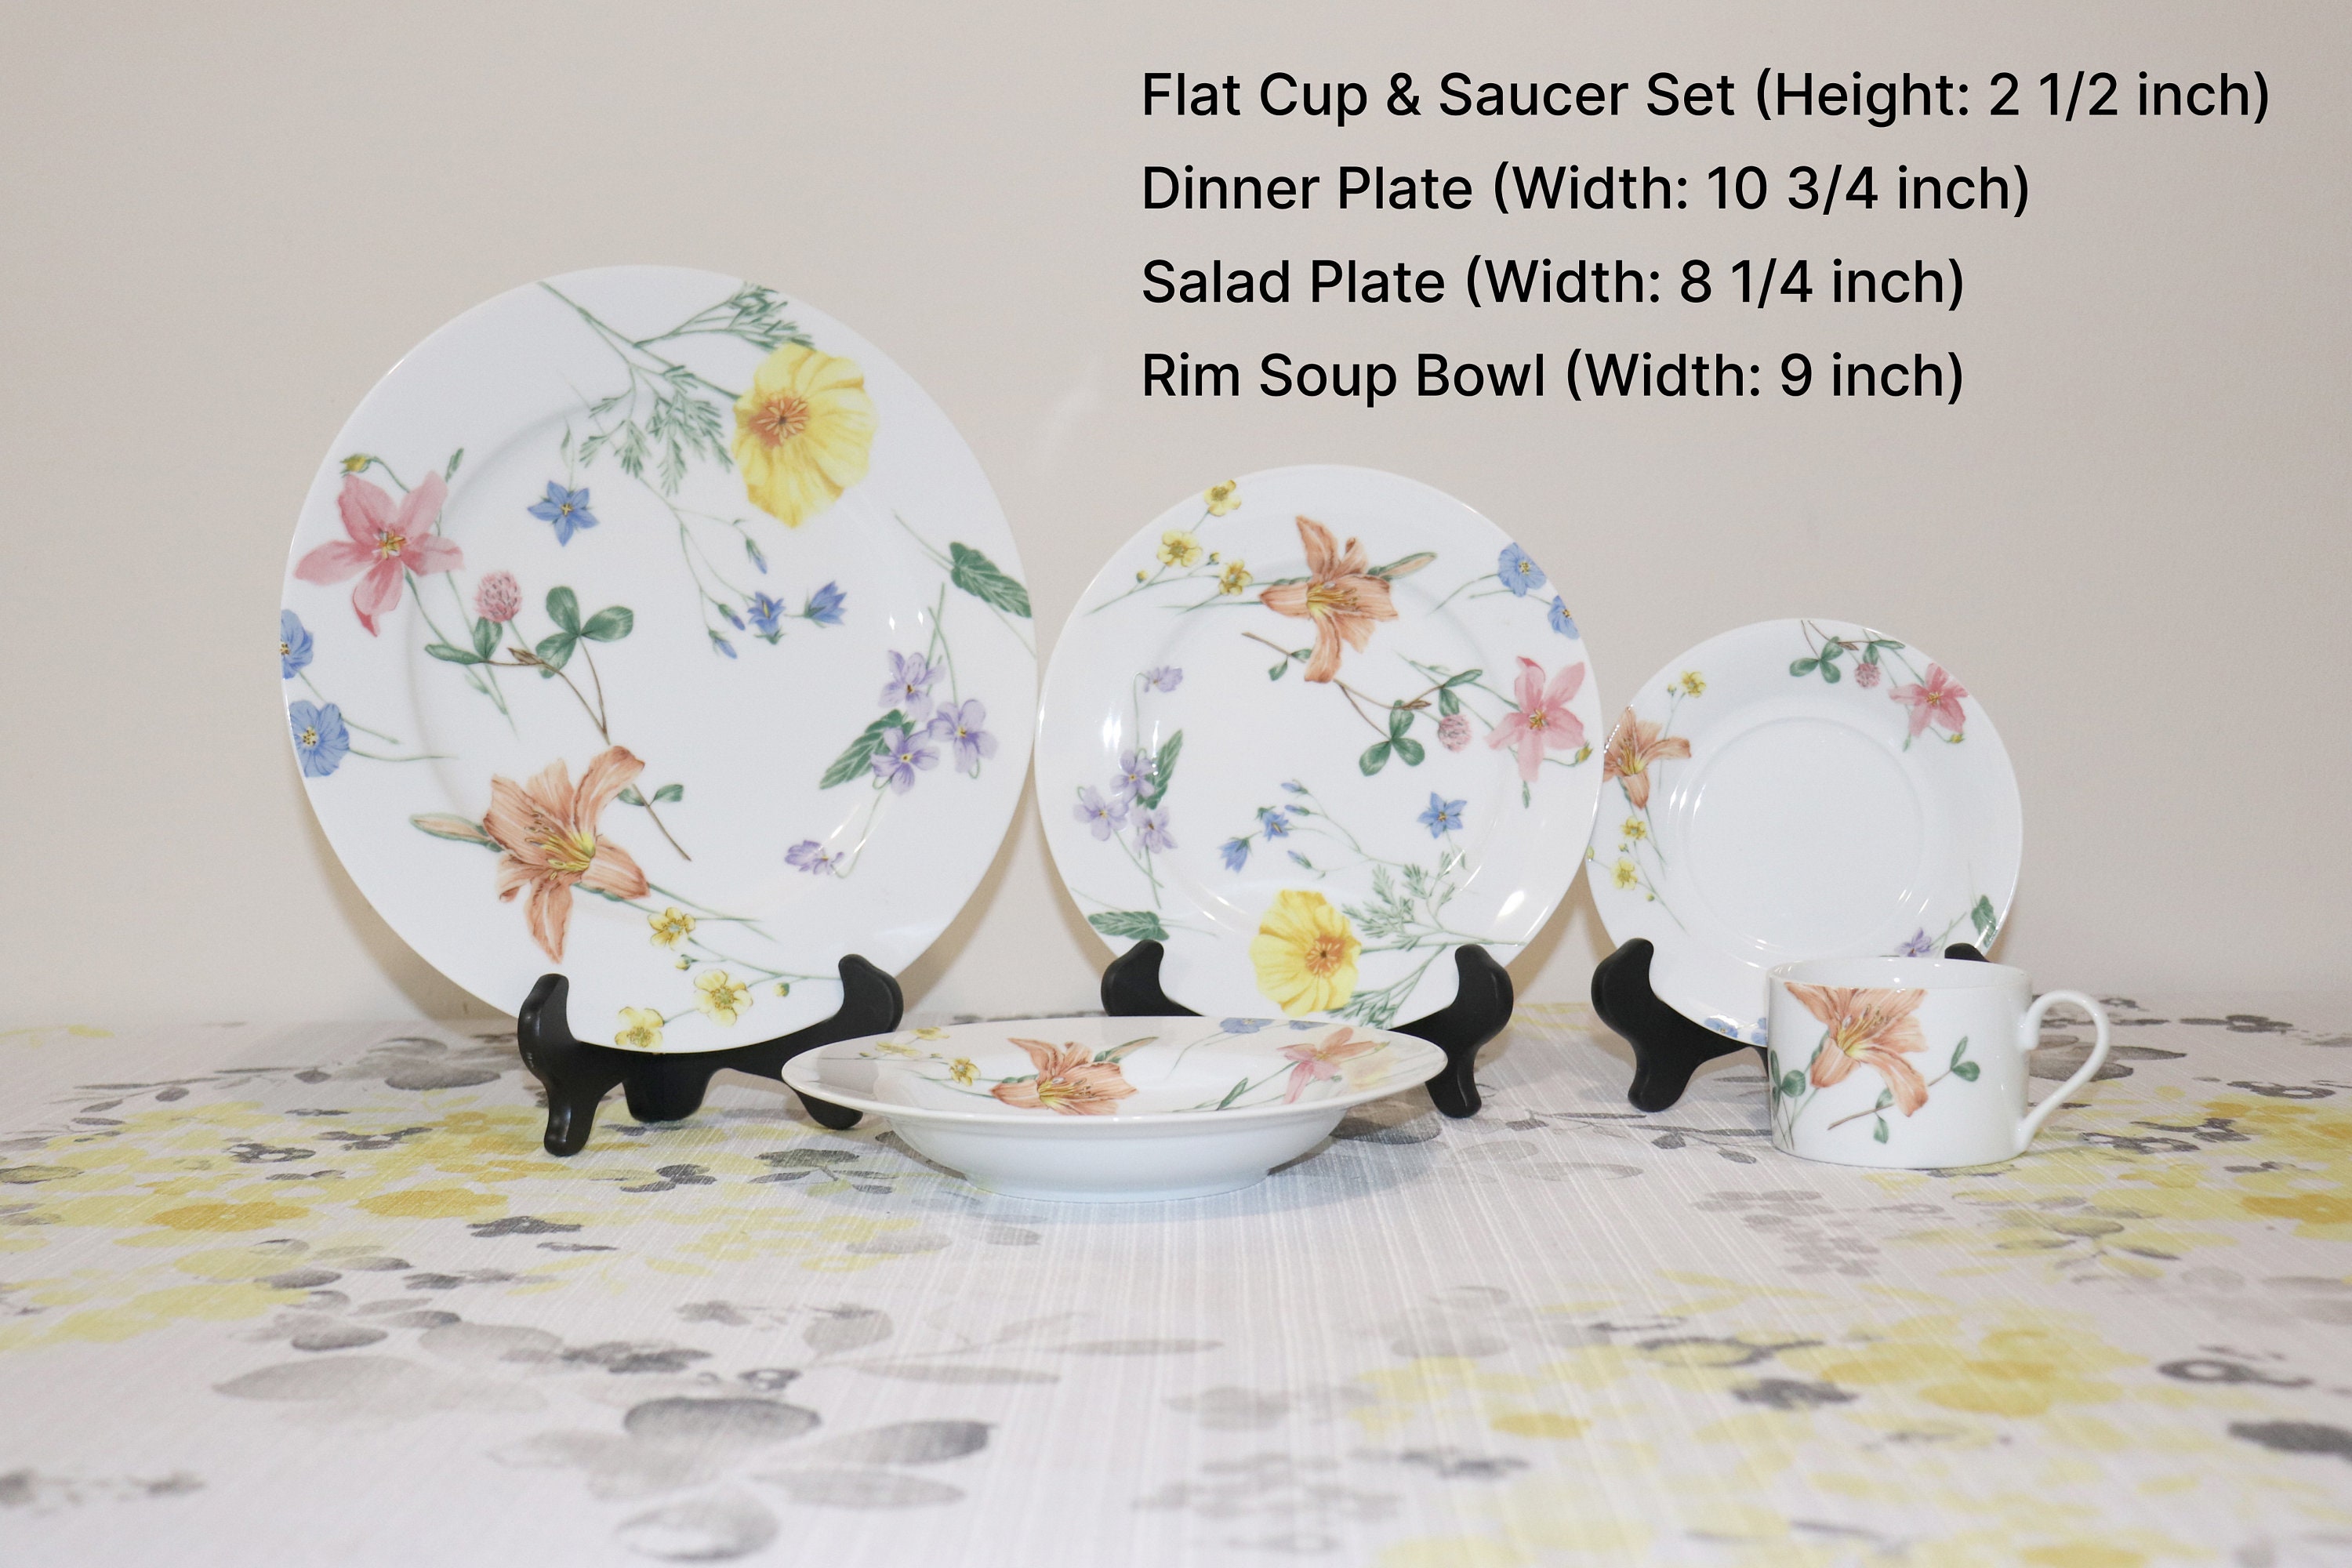 Mikasas Whole Wheat Chop, Dinner Plates, Salad Plates, 9 Bowl, Salt Shaker,  Soup and Cereal Bowls, Lid for Butter Dish, Cups & Saucers 